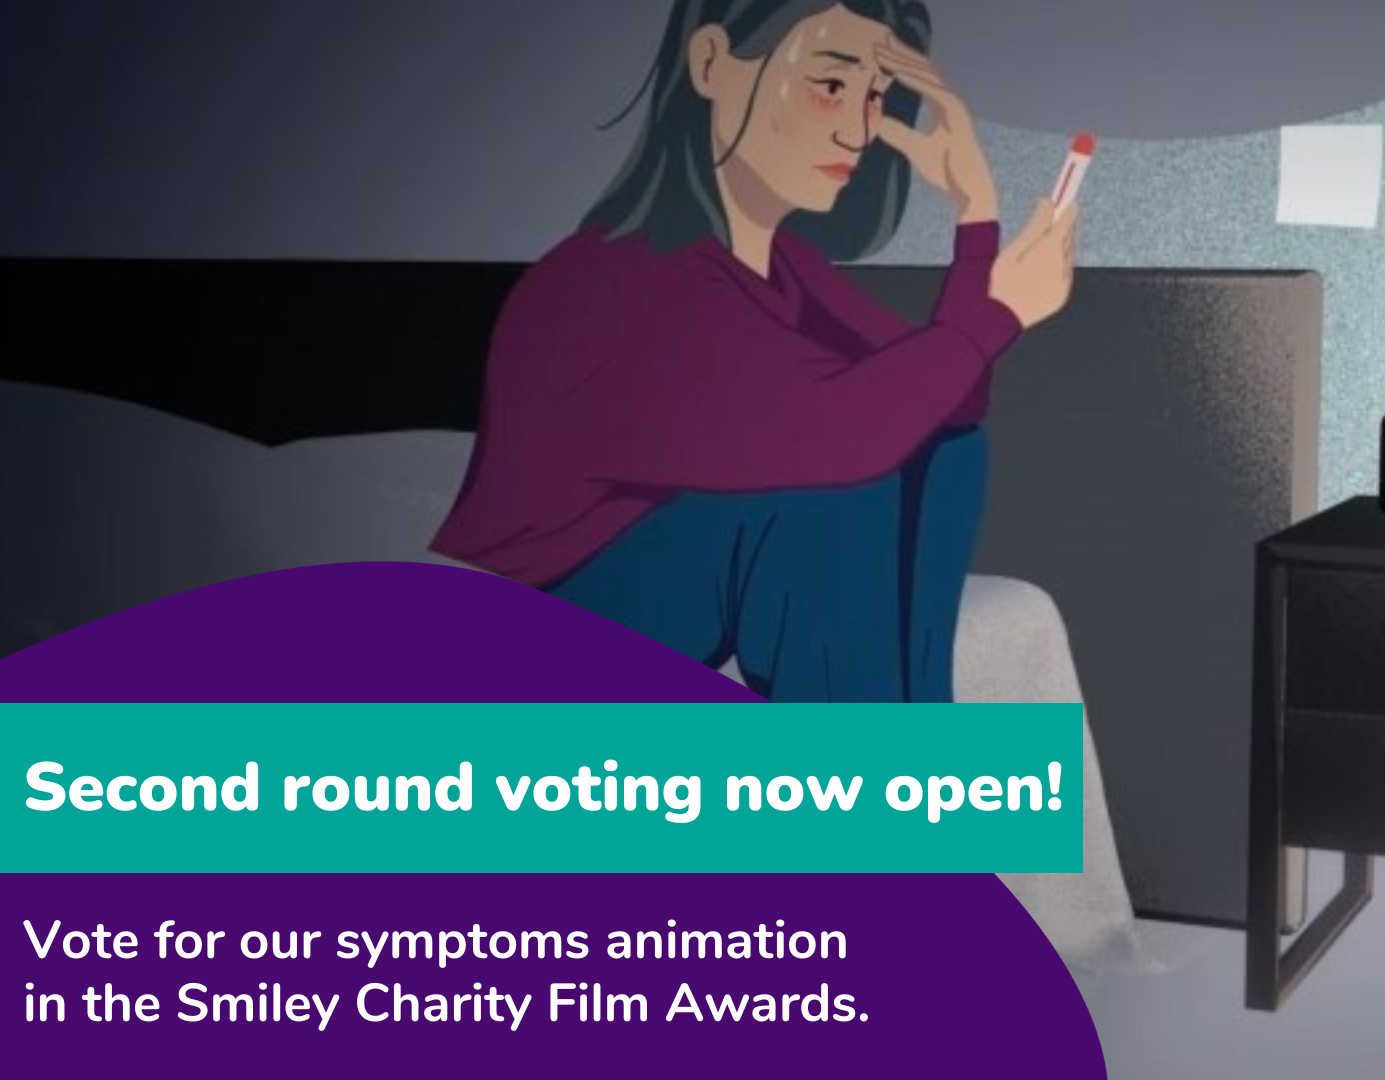 Second round voting now open! Vote for our symptoms animation in the Smiley Charity Film Awards